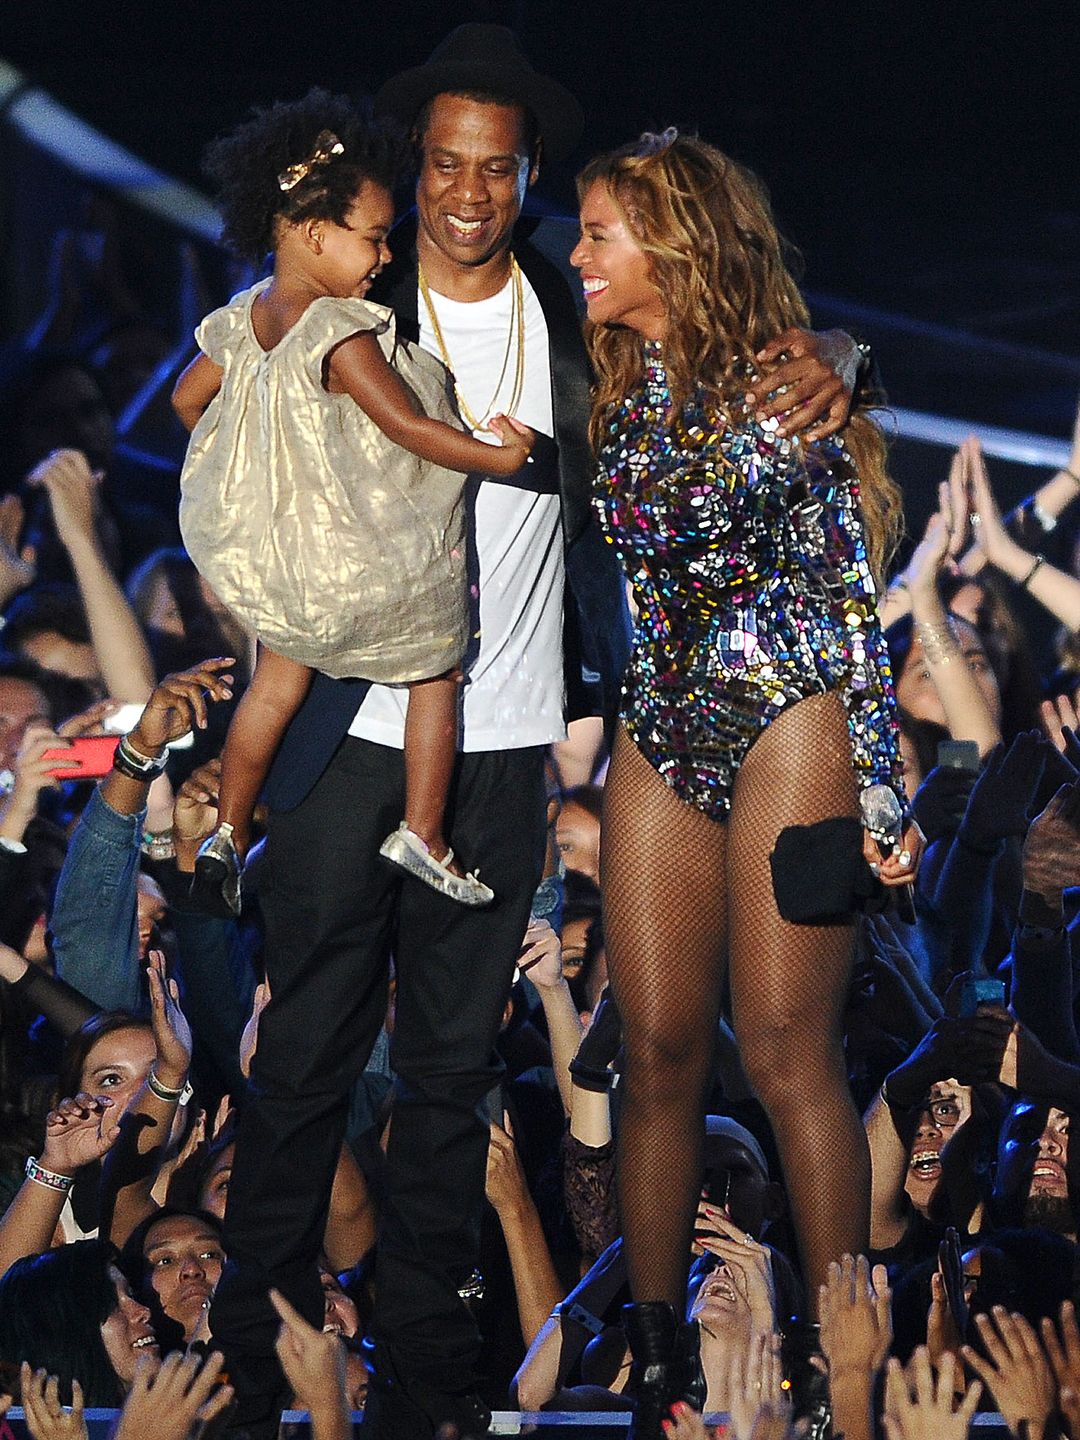 Beyoncé and Jay-Z stand smiling on stage, with Jay-Z holding Blue Ivy in his arms